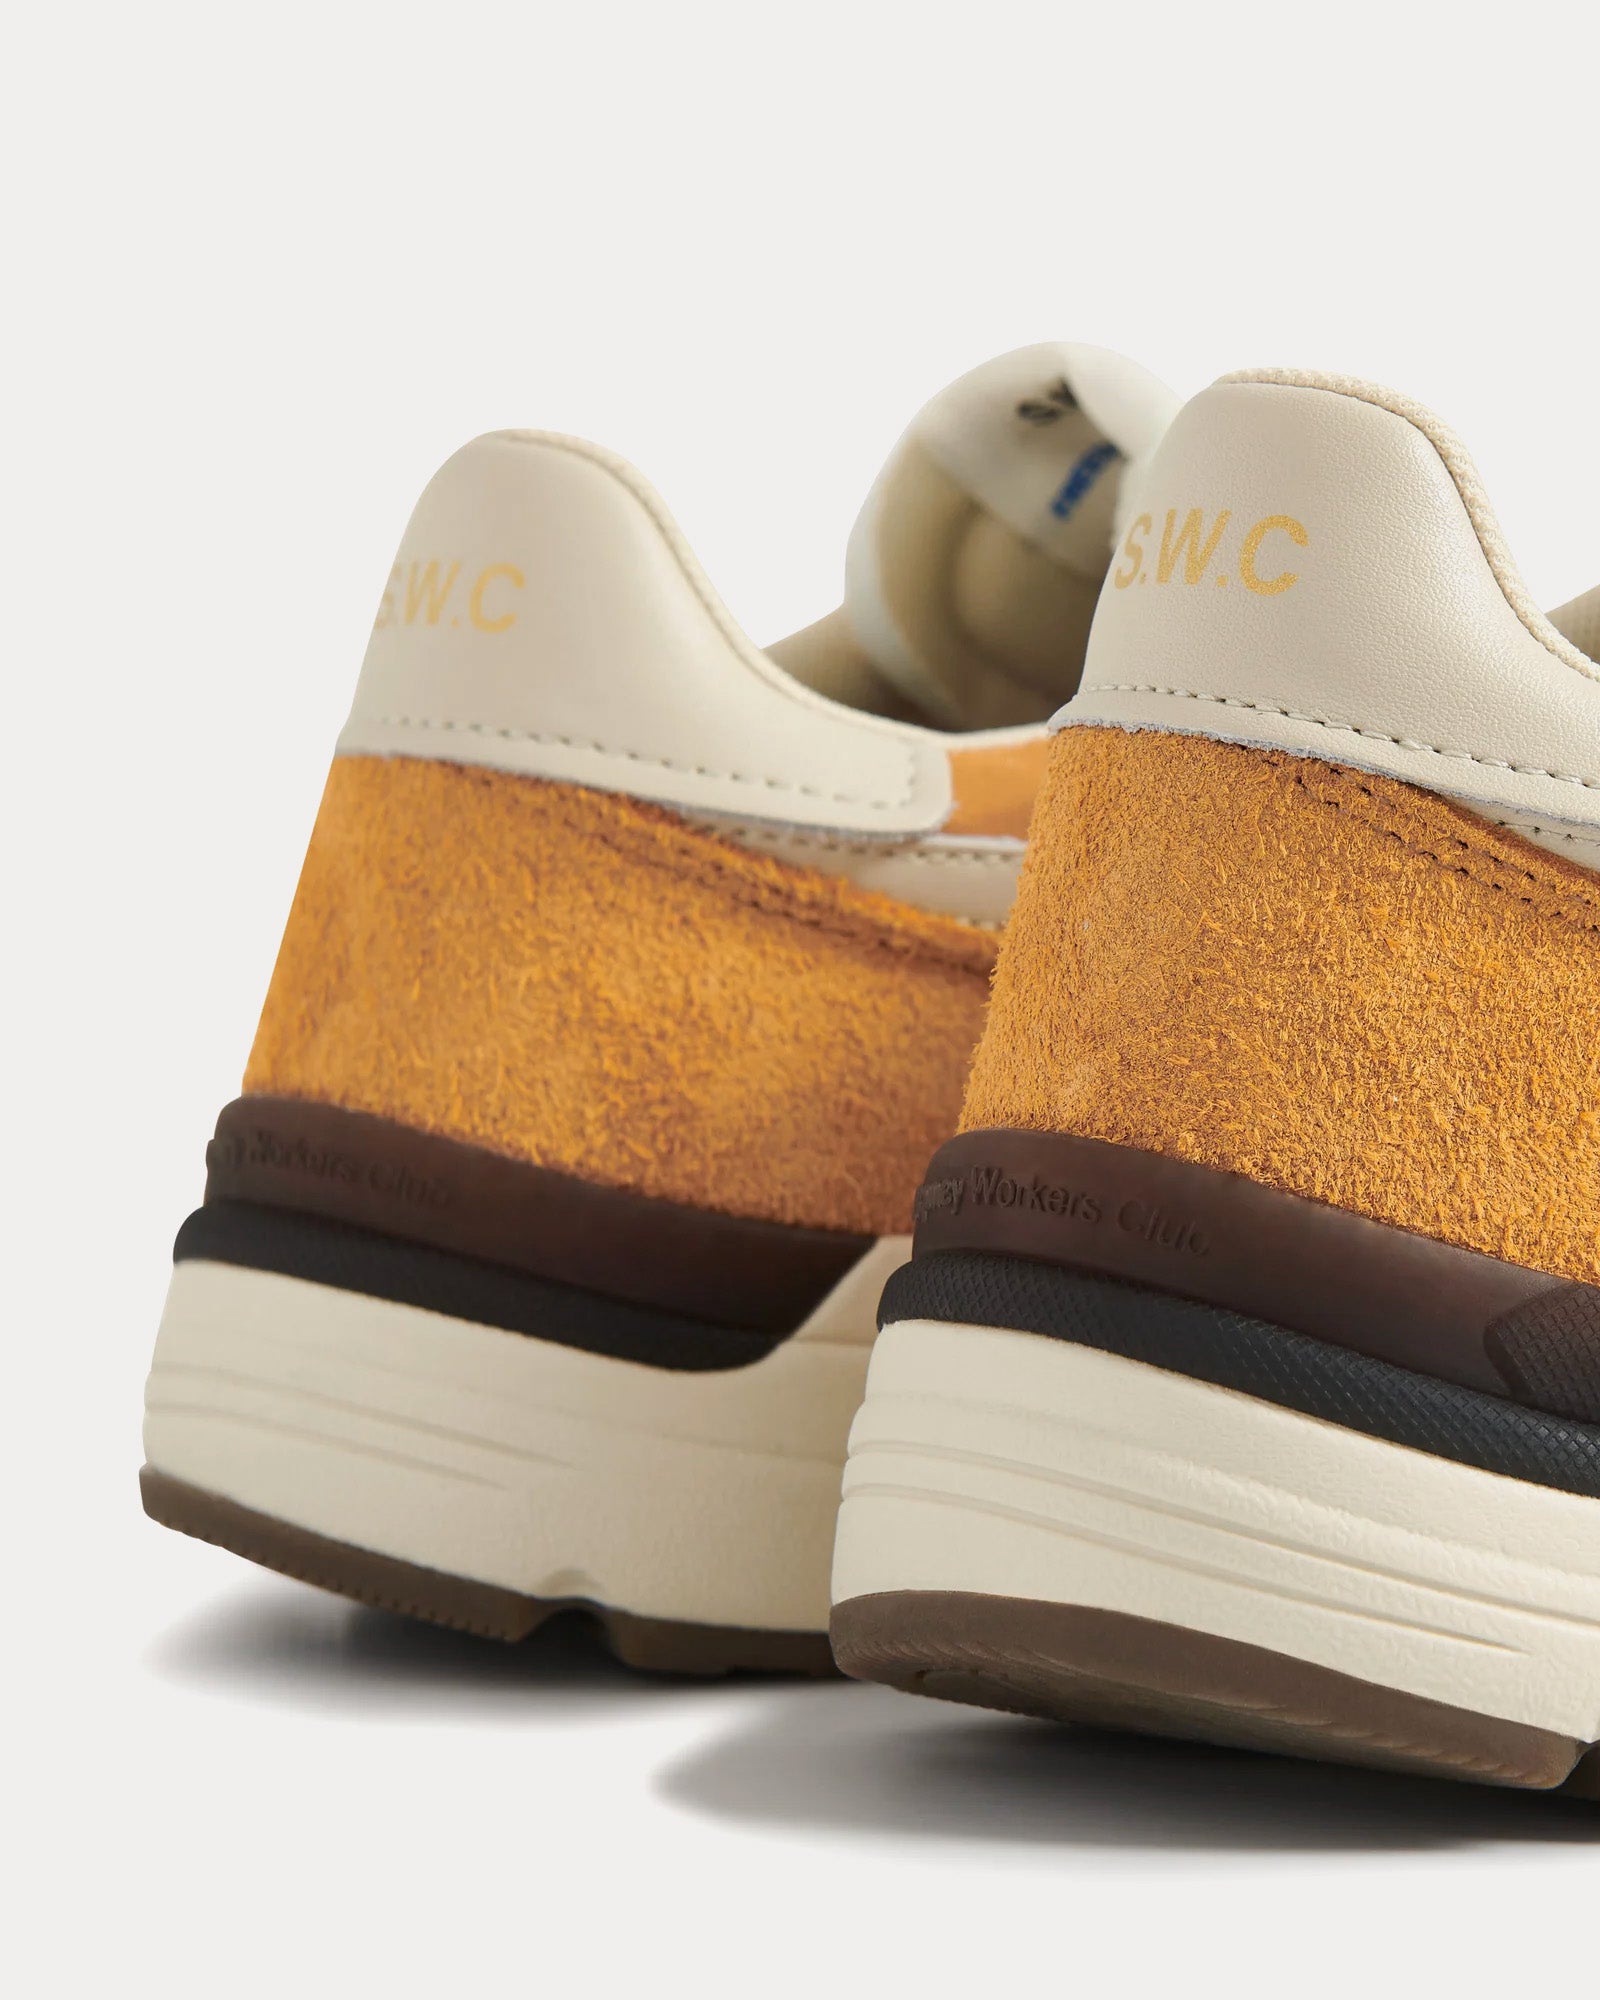 Stepney Workers Club - Osier S-Strike Suede Mix College Yellow Low Top Sneakers